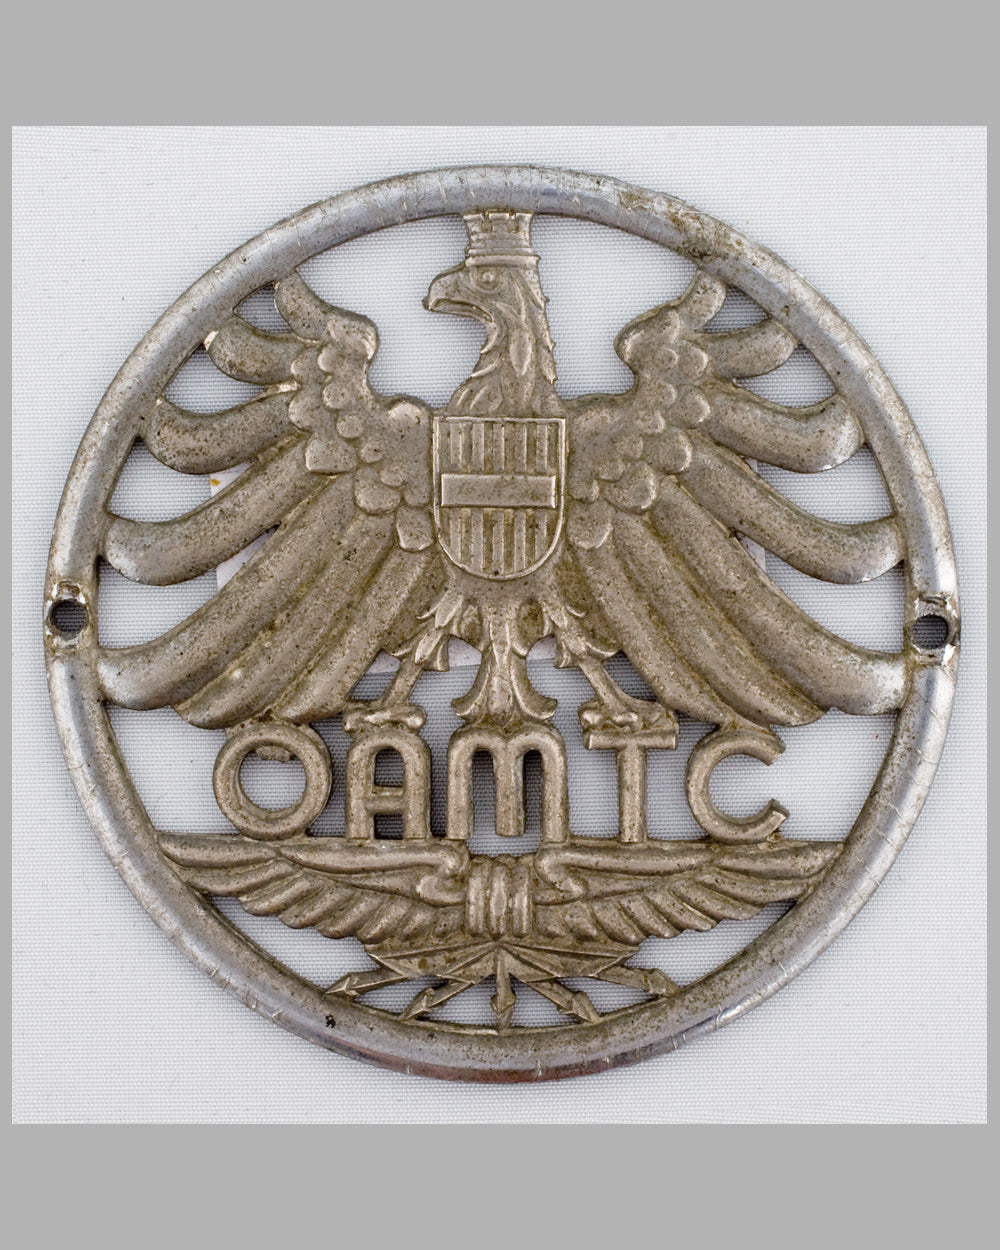 OAMTC - Ostreich Automobil Motor Touring Club member’s badge